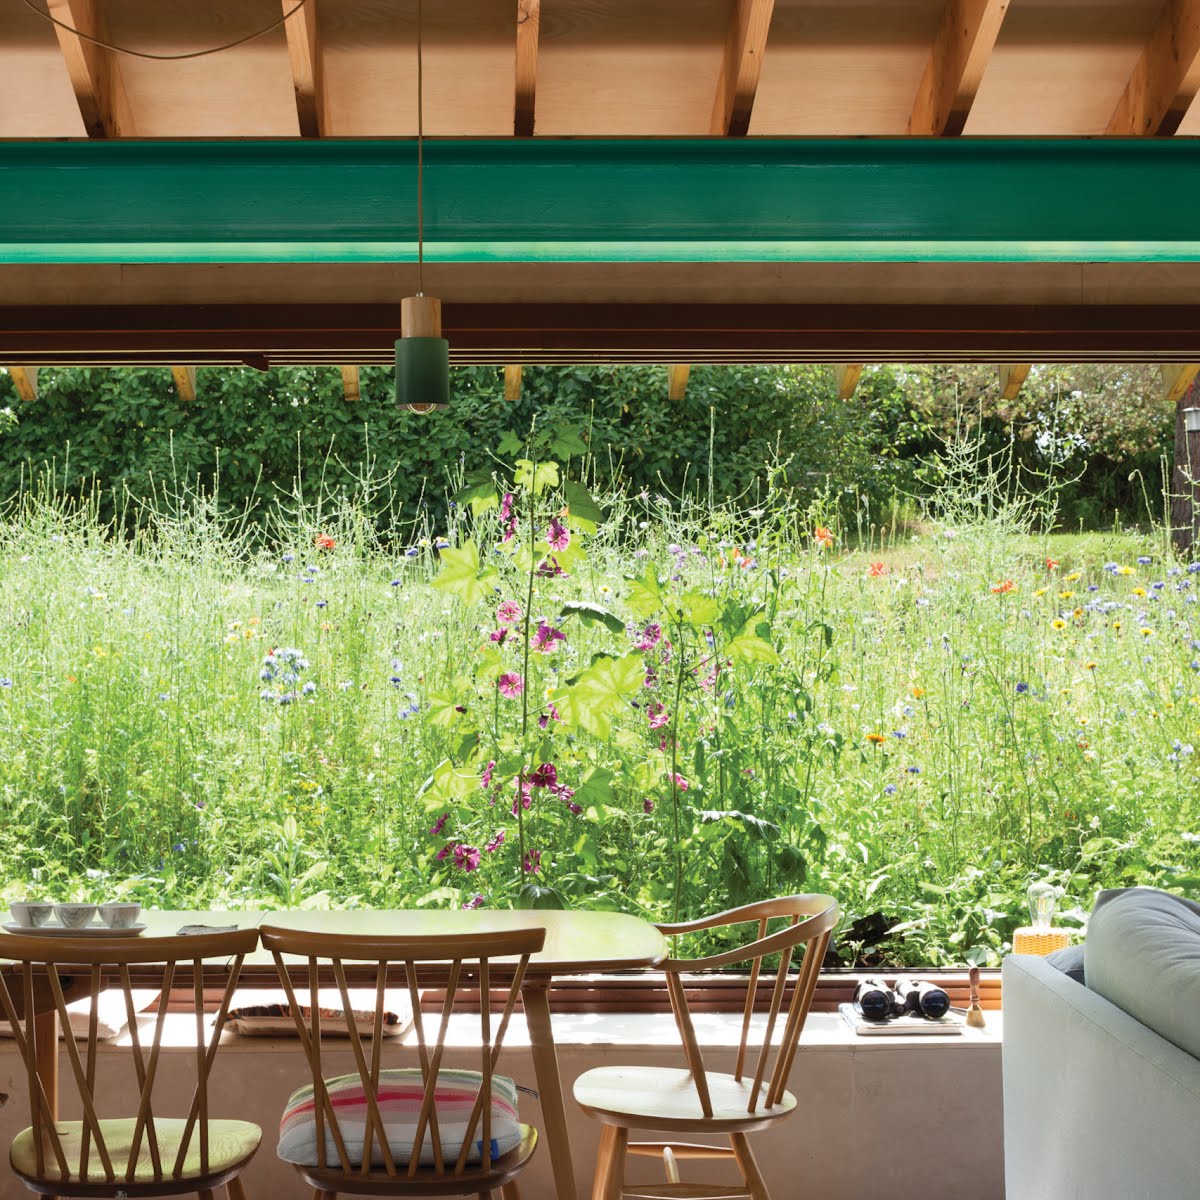 The main living space features an 8m-wide landscape window looking out to the wildflower meadow.